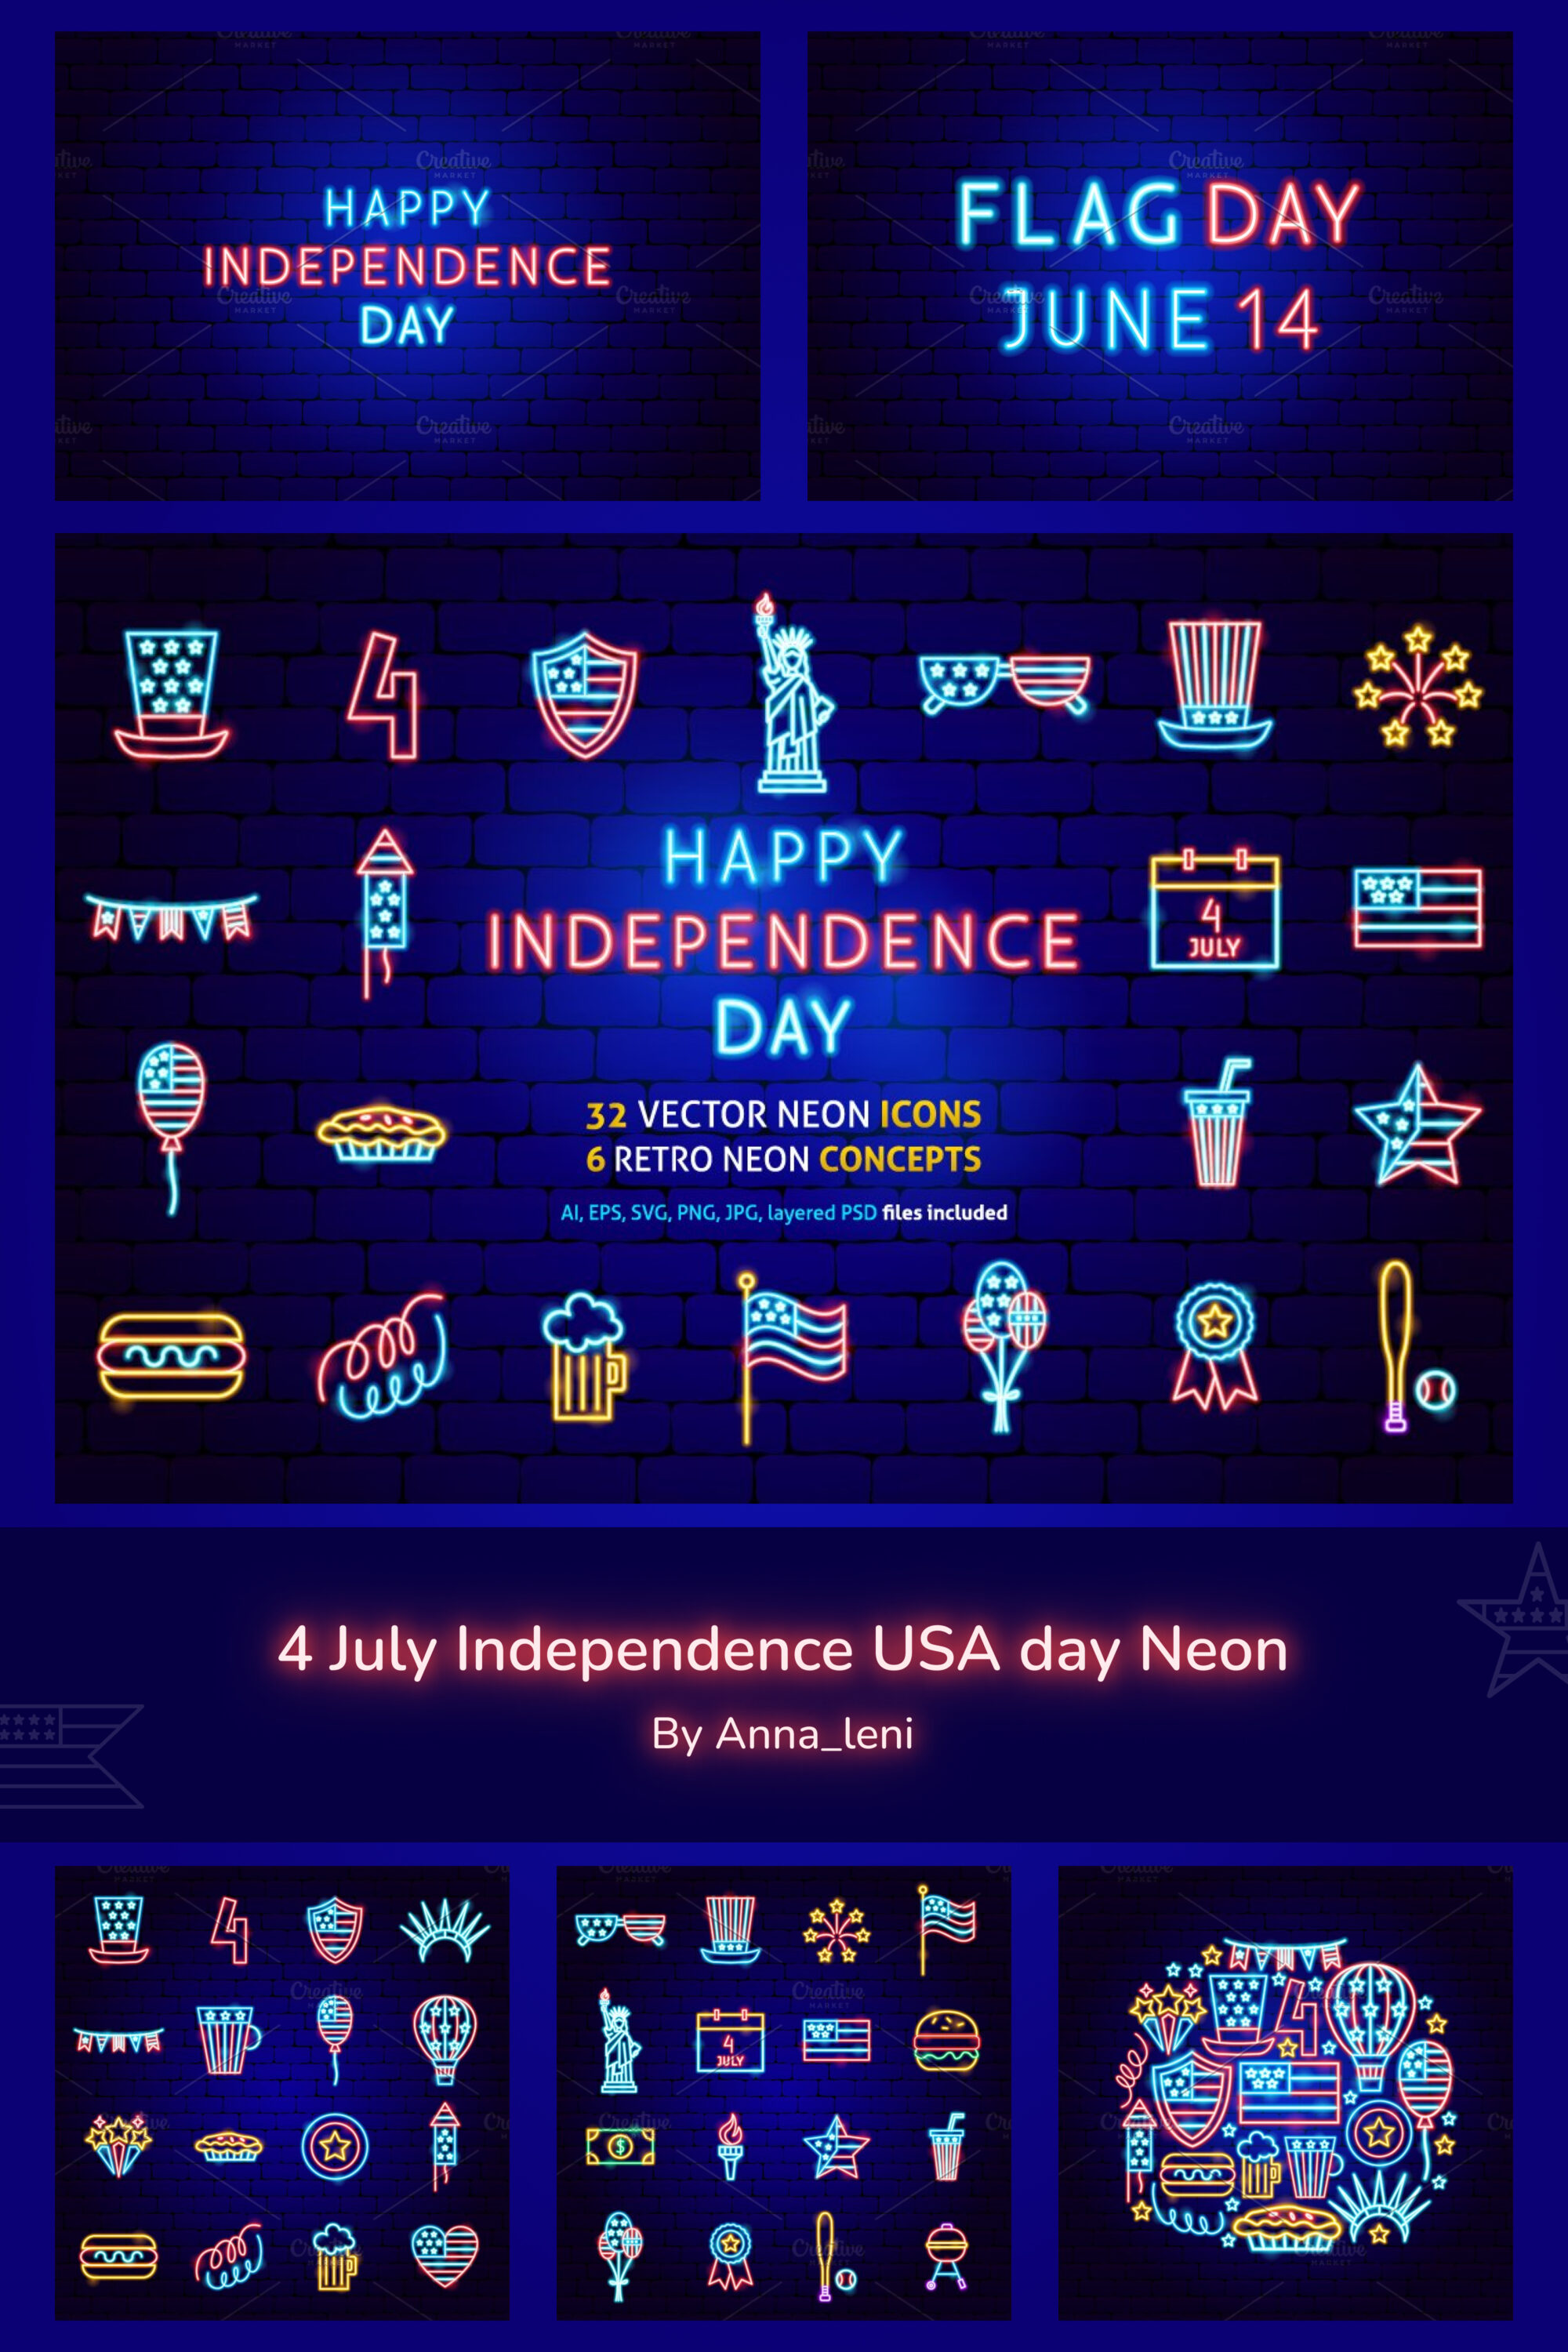 4 july independence usa day neon of pinterest.